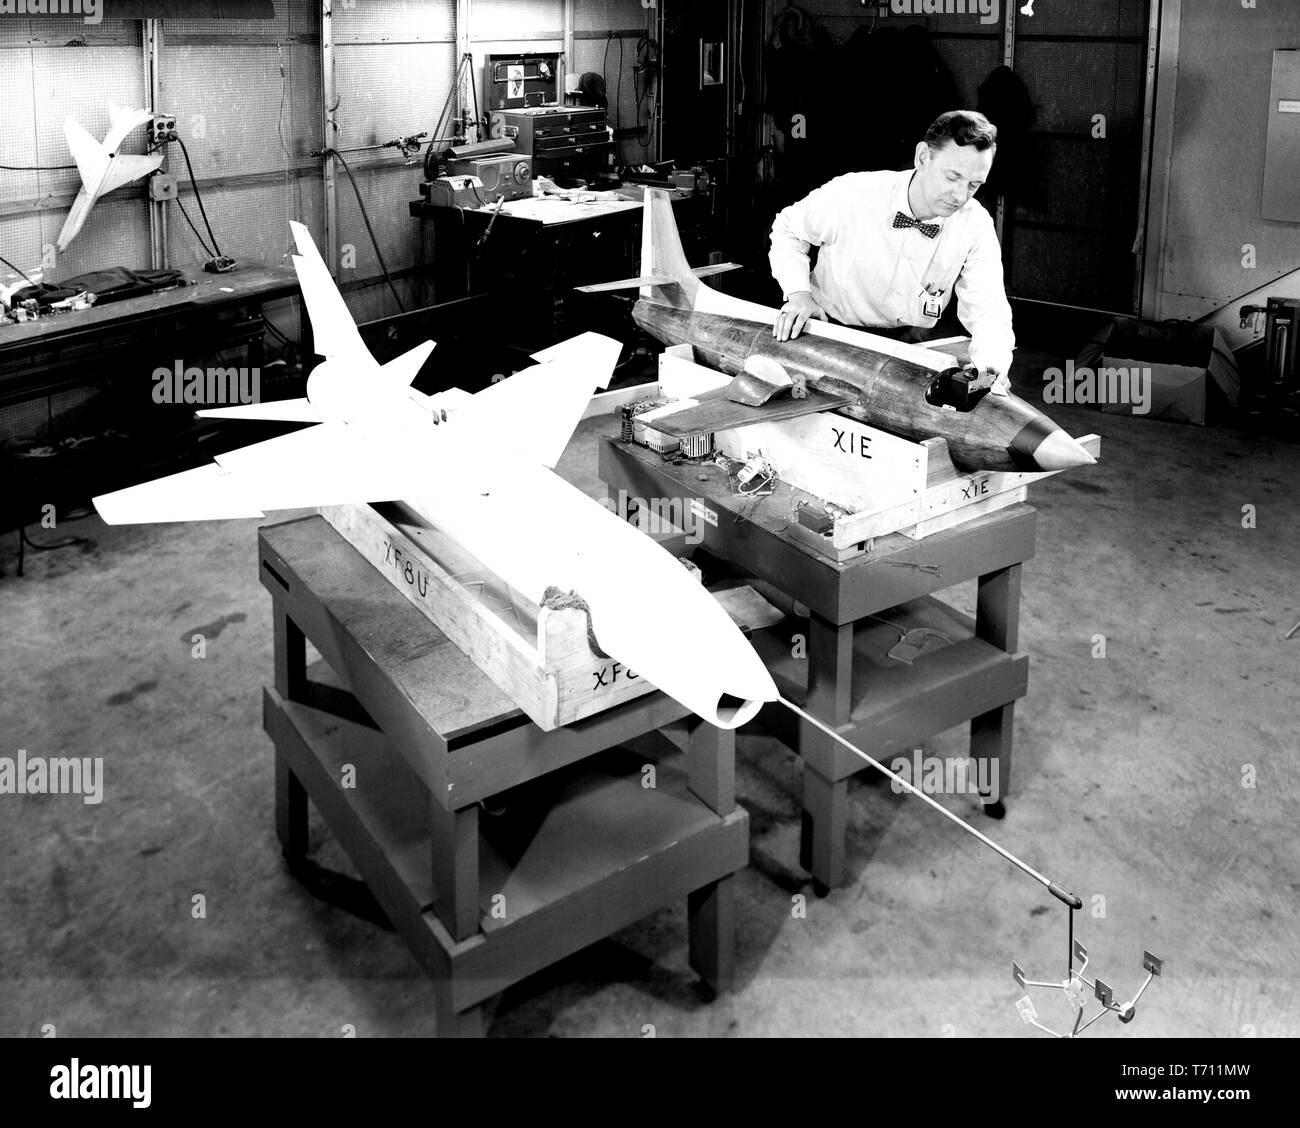 Photograph of the NASA technician preparing the Bell X-1E and the Vought XF-8U Crusader dynamic models for wind tunnel testing, February 19, 1957. Image courtesy National Aeronautics and Space Administration (NASA). () Stock Photo